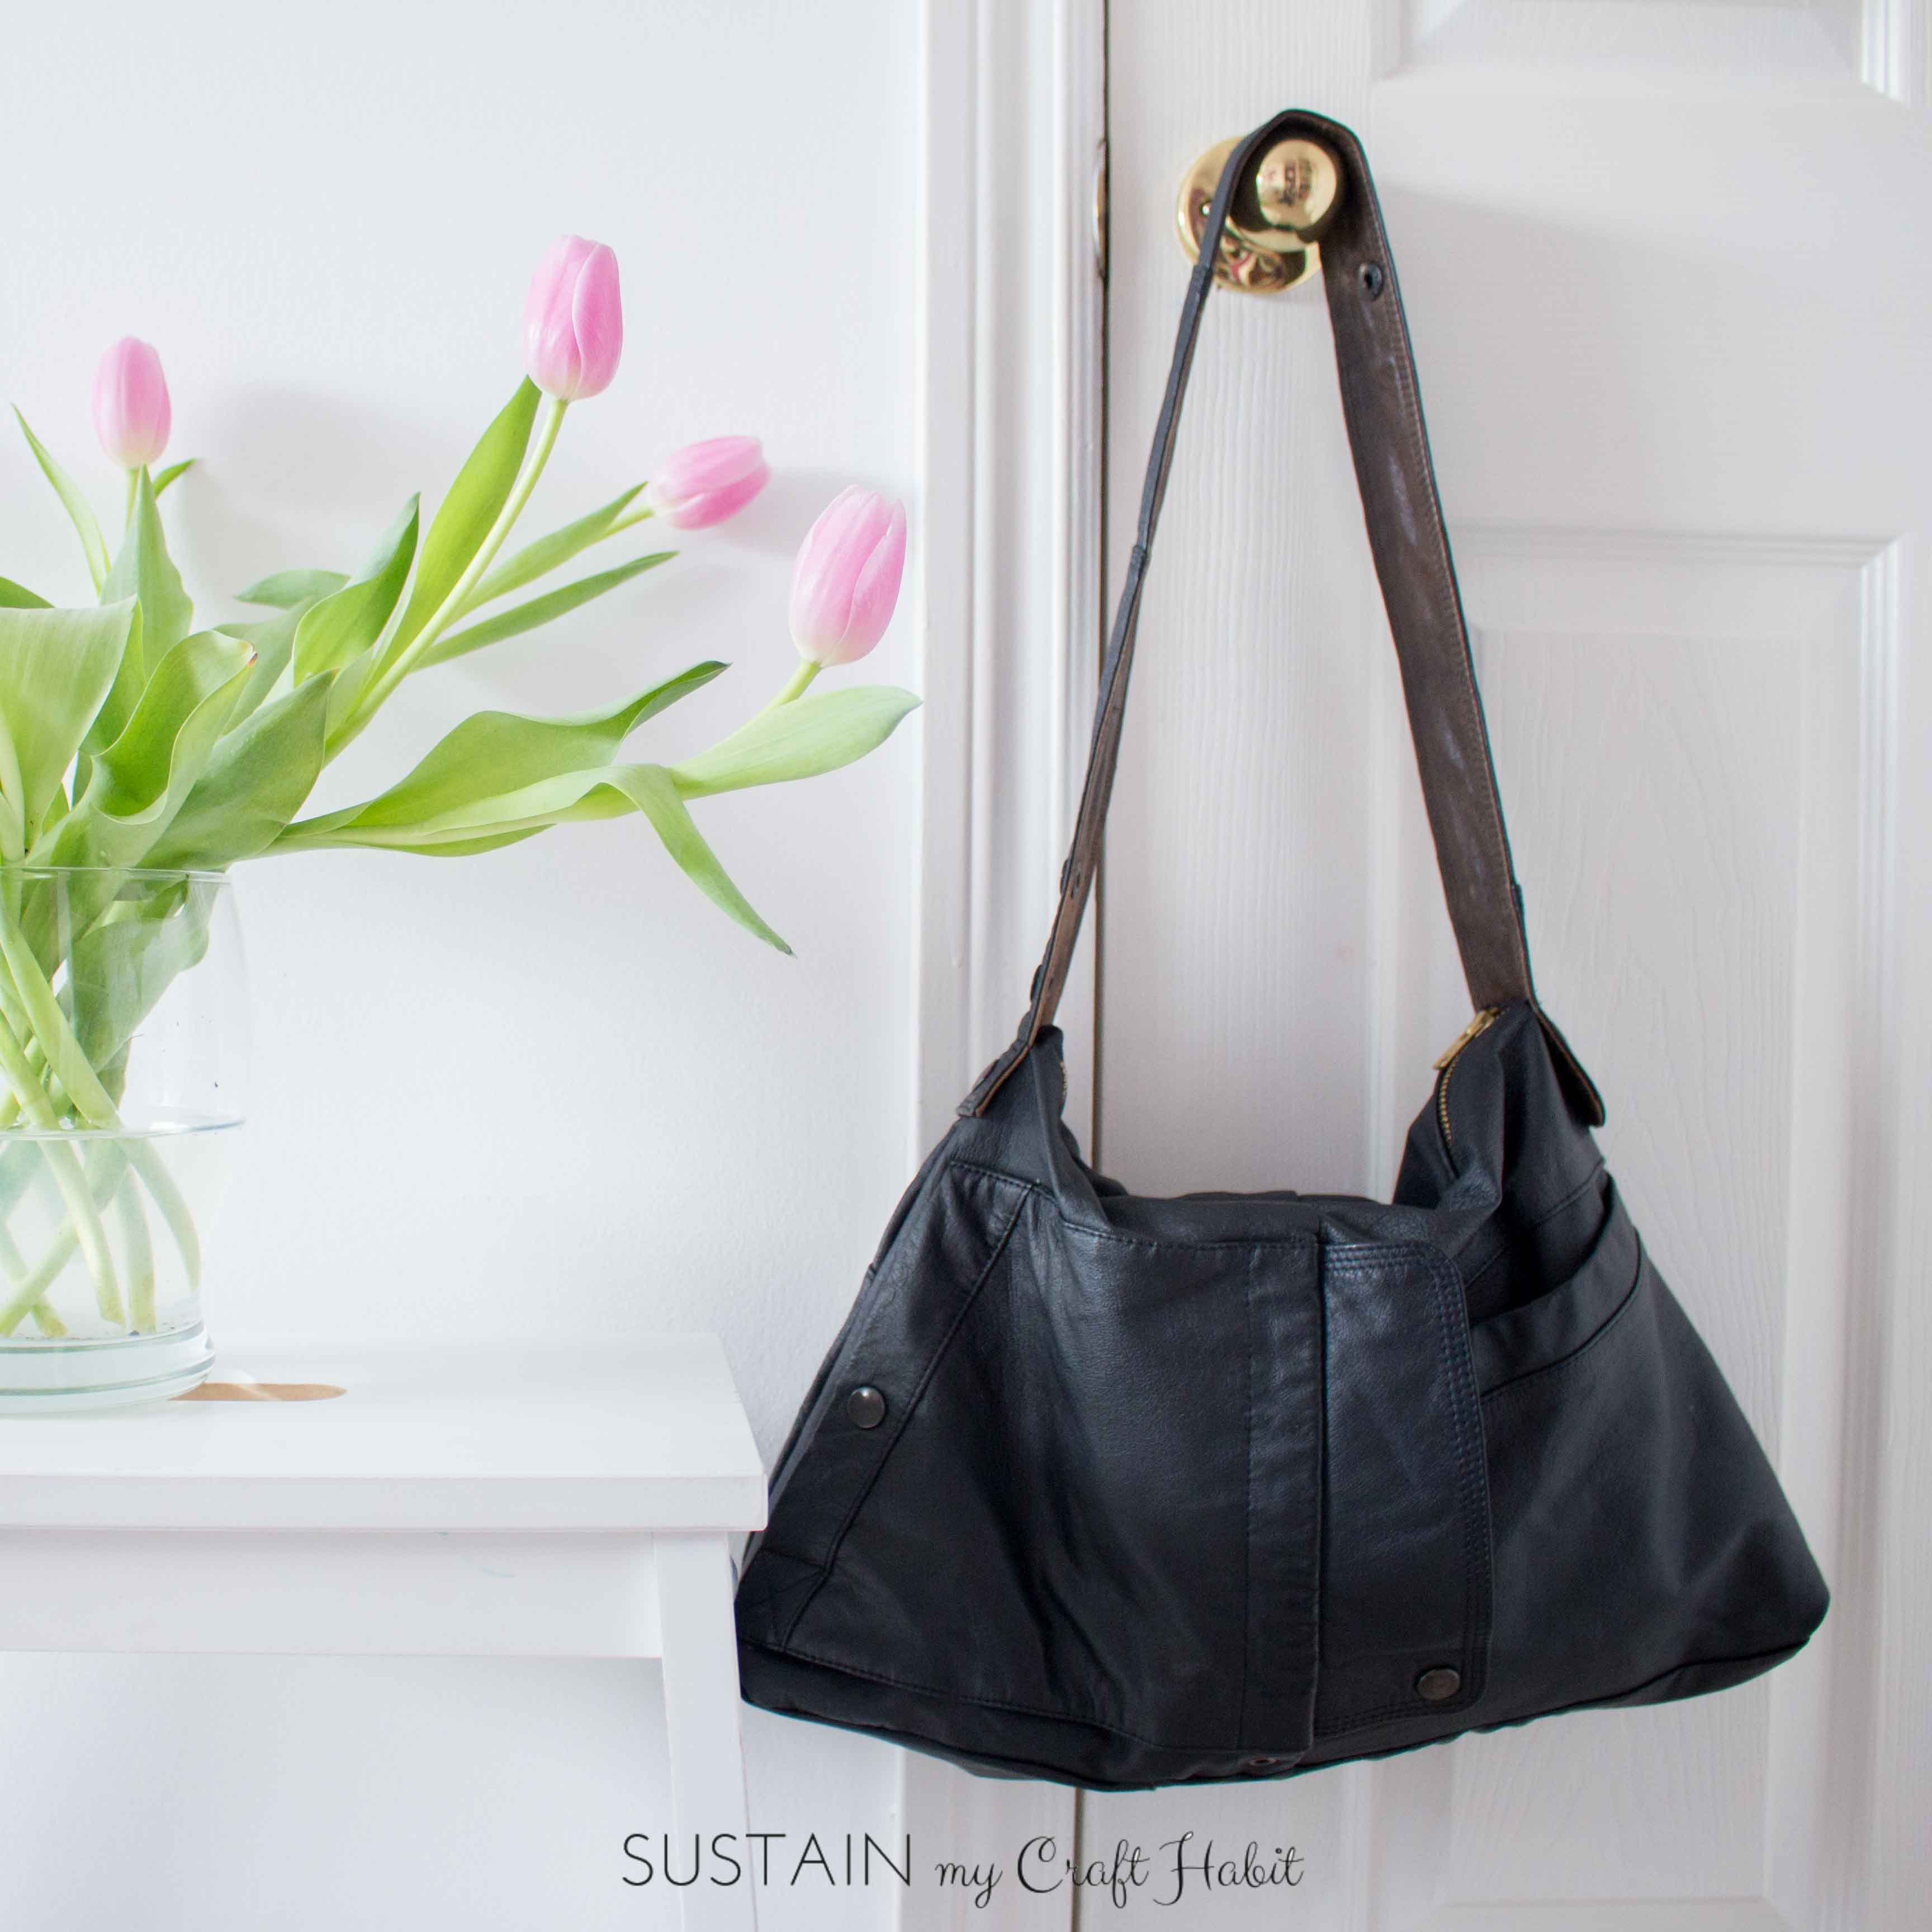 A dated leather jacket gets a new purpose in life as a useful, edgy and beautiful new DIY bag. This one-of-a-kind upcycled handbag is a great weekend sewing project. The detailed step-by-step tutorial is included.